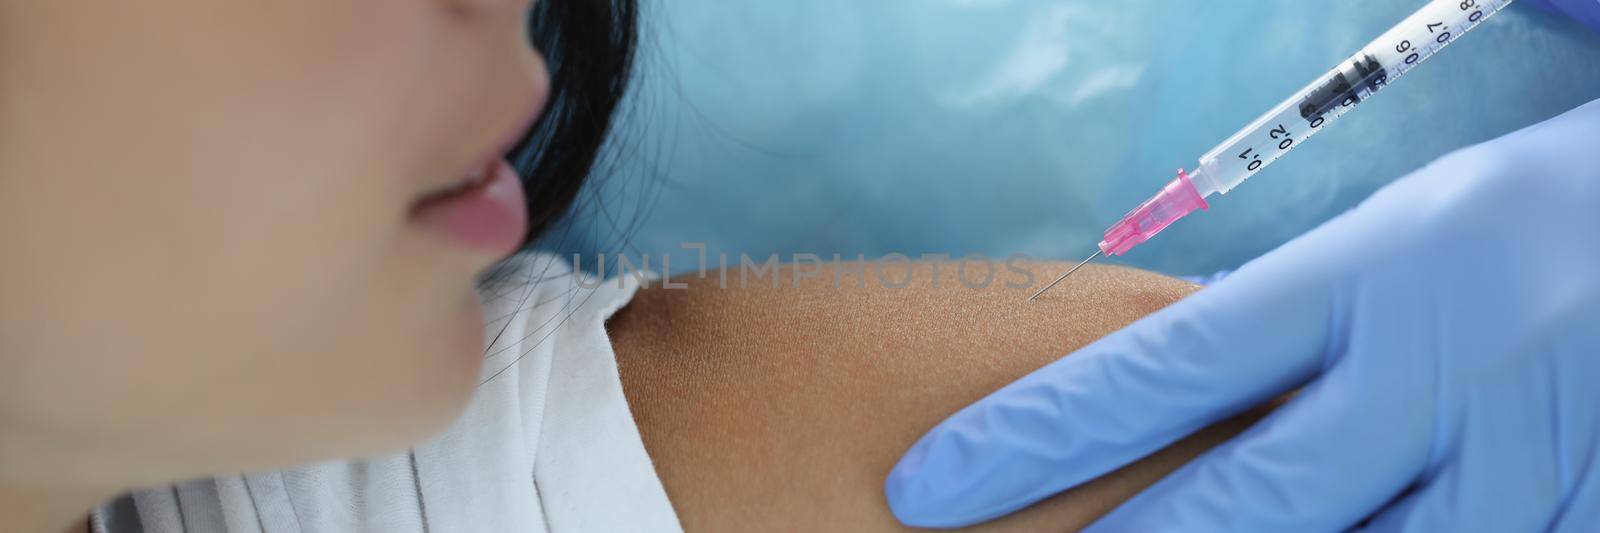 Getting antiviral vaccine at hospital by kuprevich